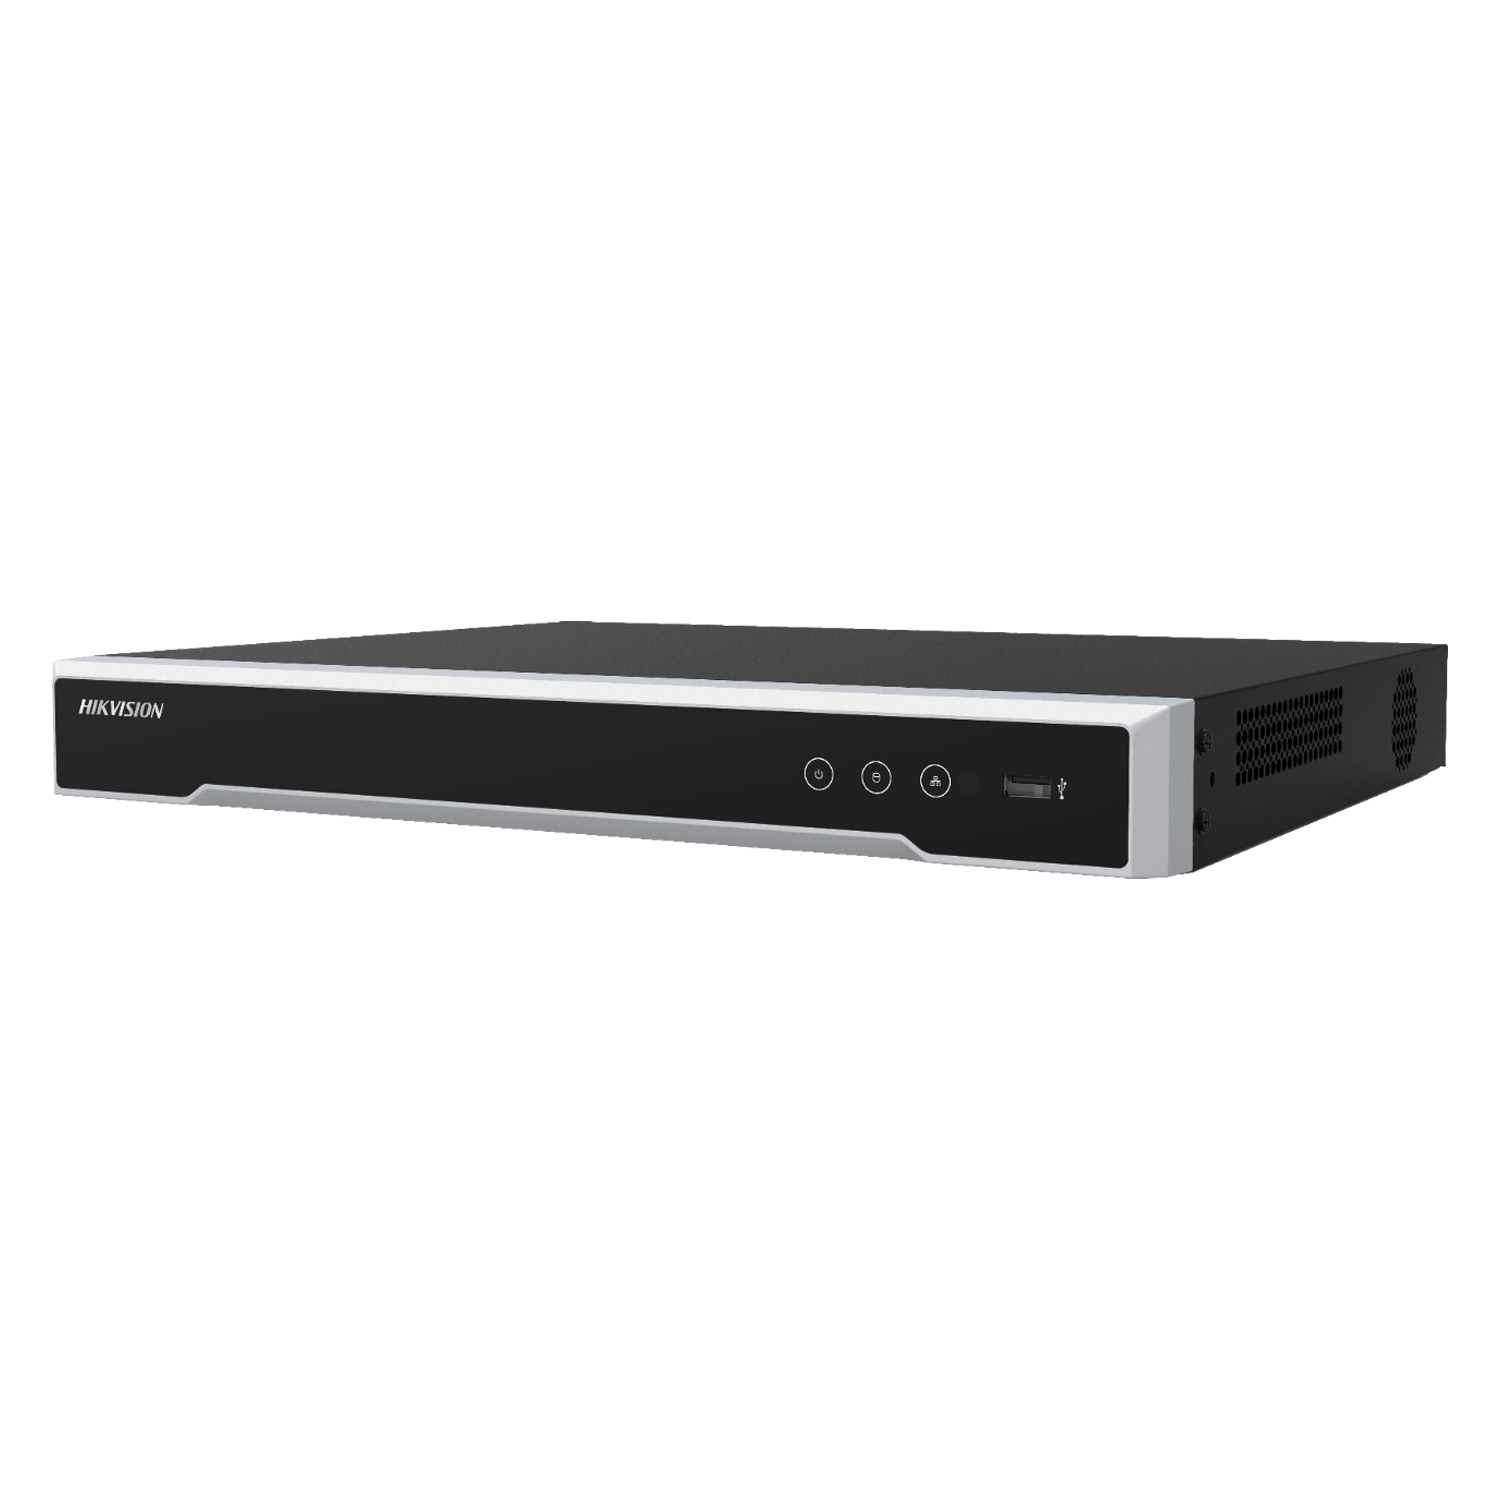 CCTV NVR Hikvision 16CH / 4K / 2HDD / H.265 - (DS-7616NI-Q2)